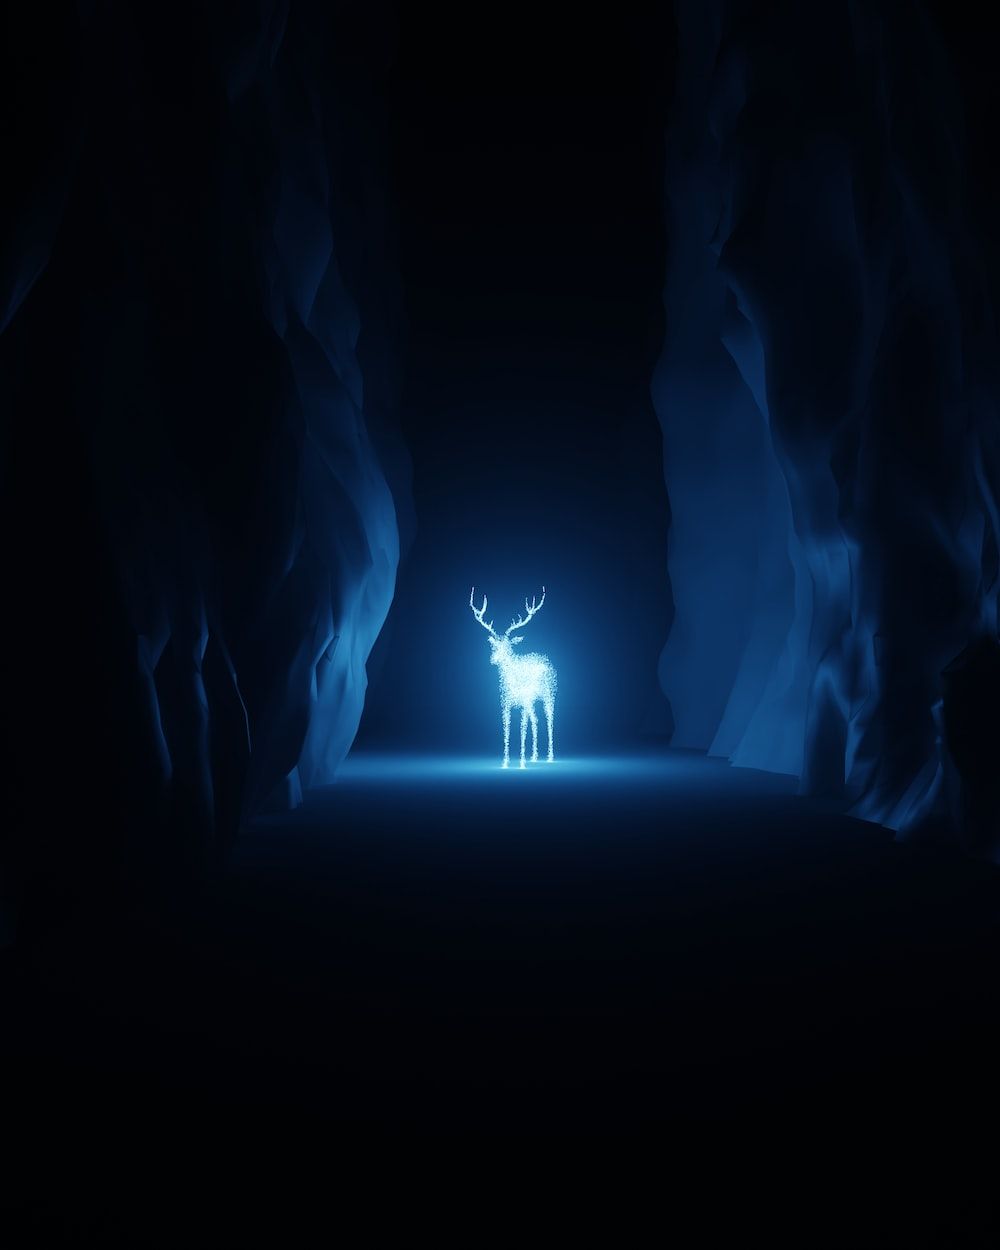 A white stag stands in a dark cave, glowing blue in the center of the image. - Harry Potter